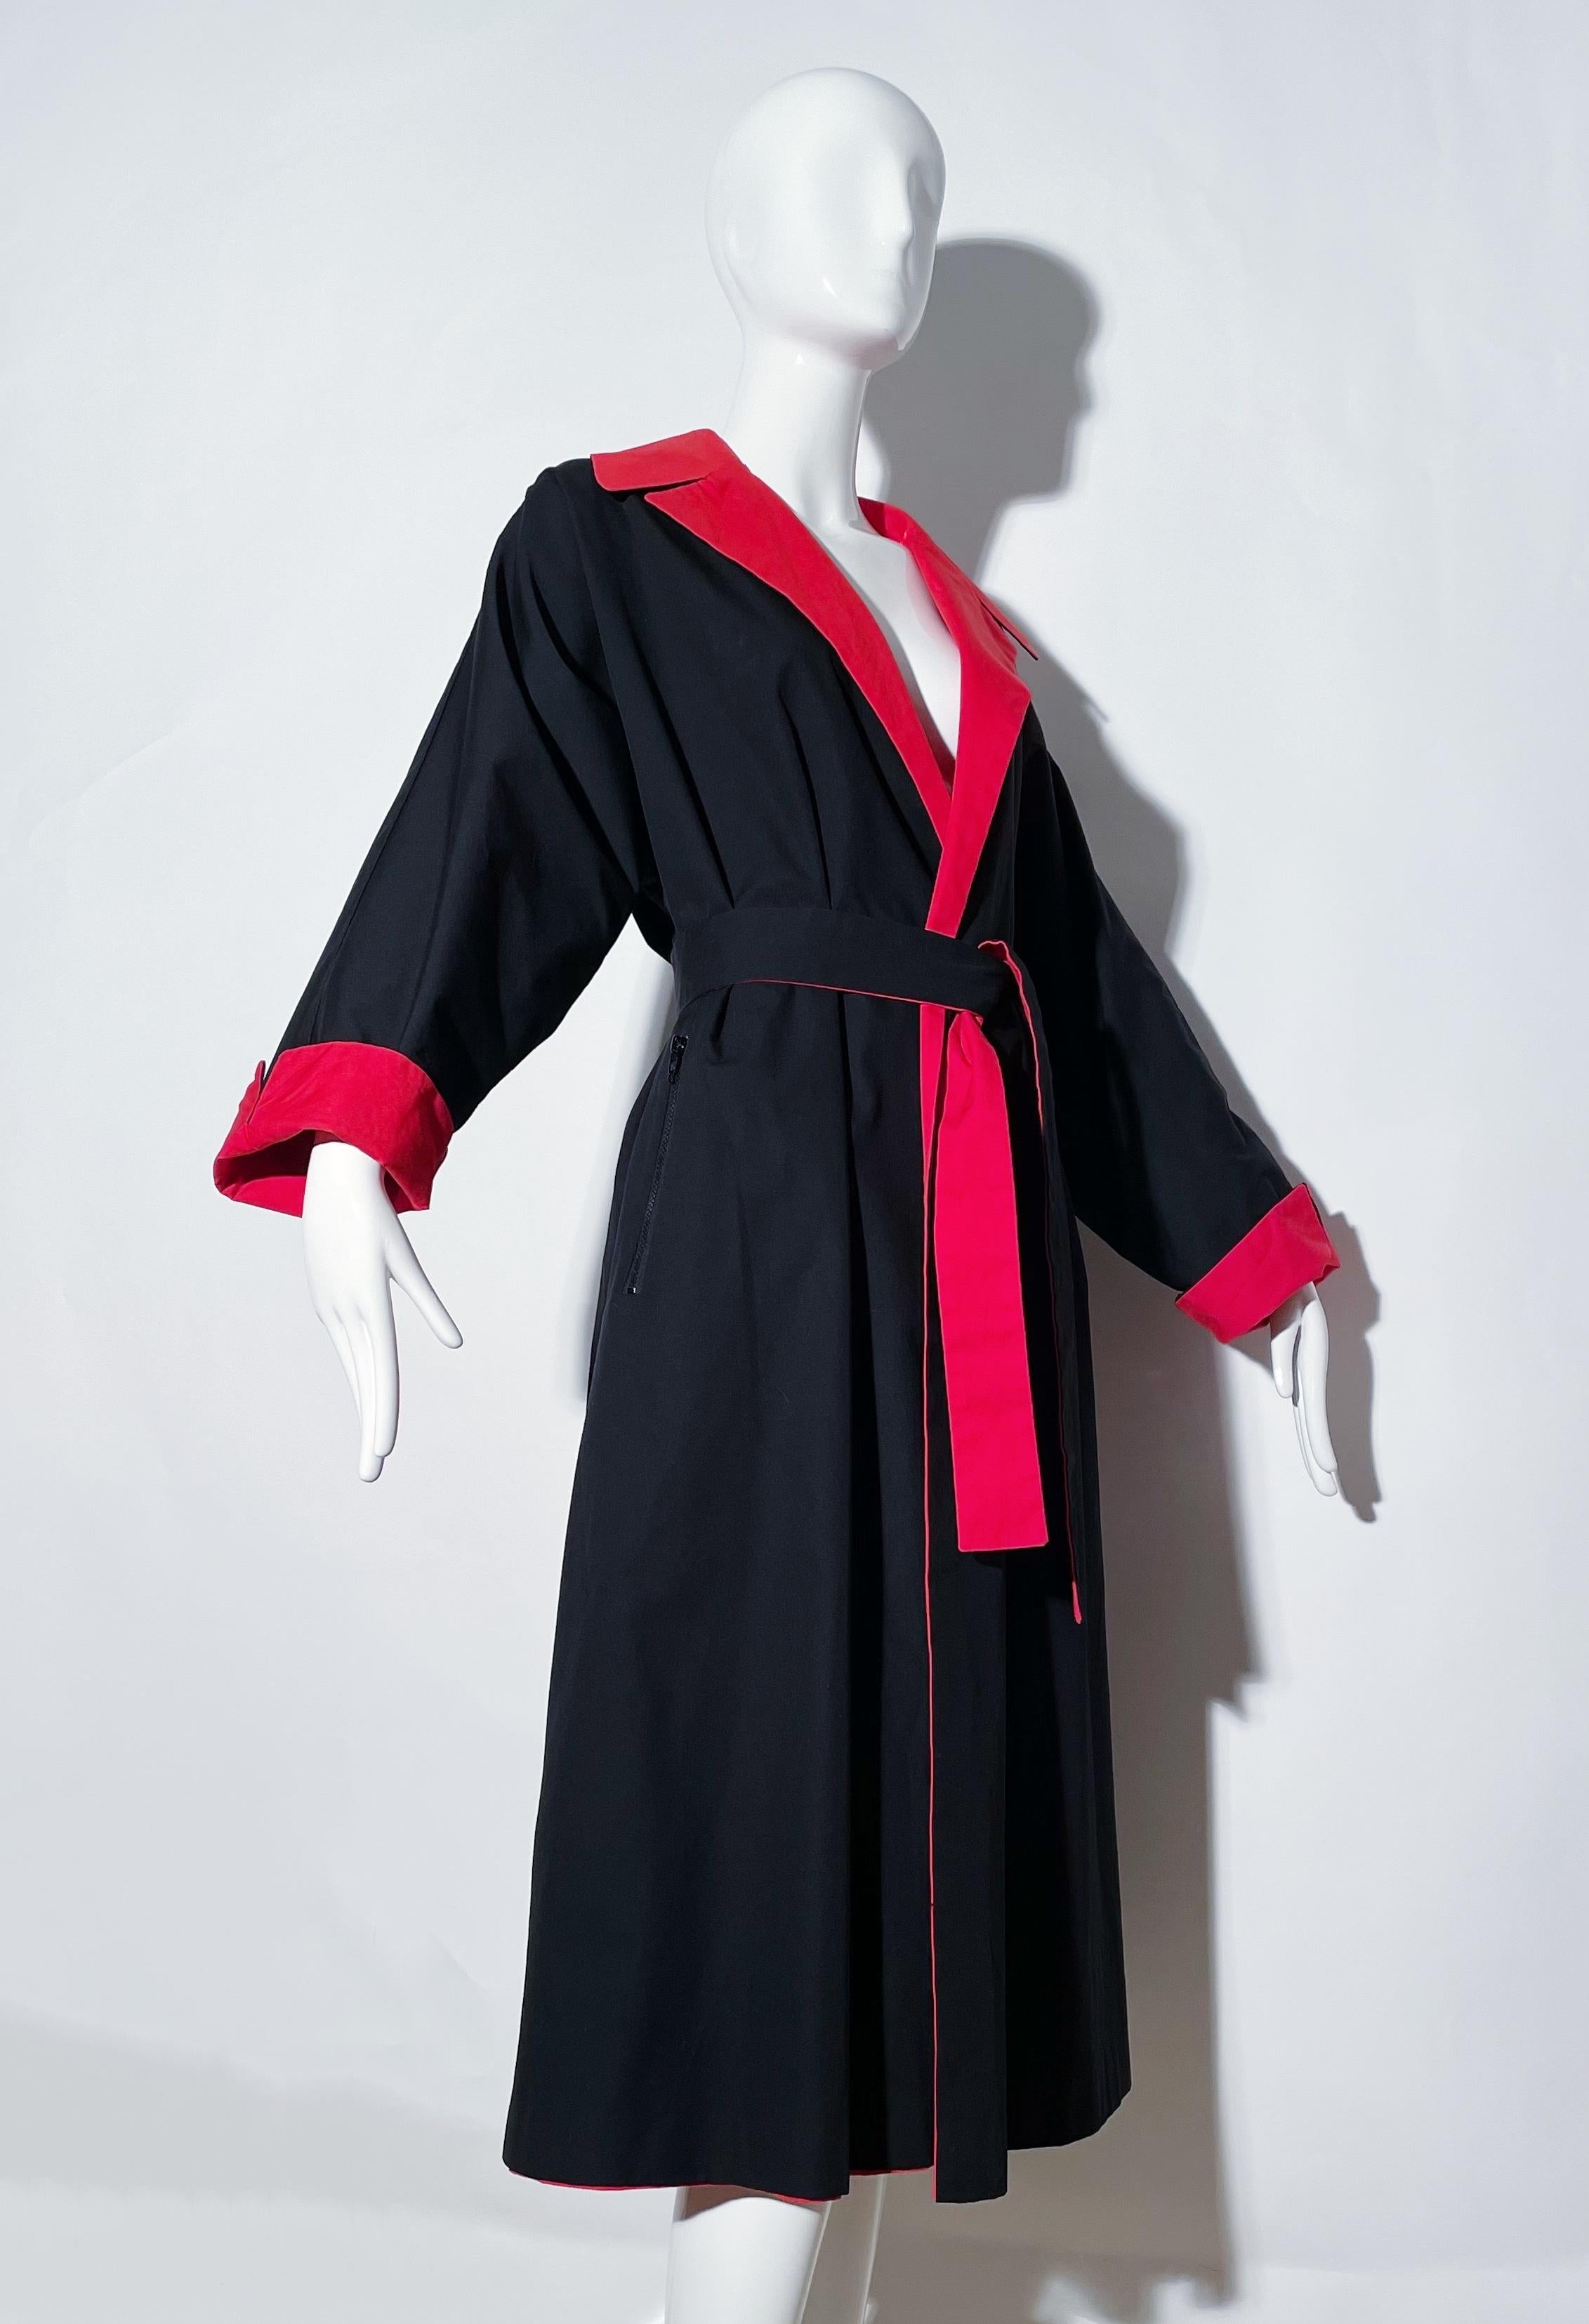 Pauline Trigere Reversible Belted Trench Coat  In Excellent Condition For Sale In Waterford, MI